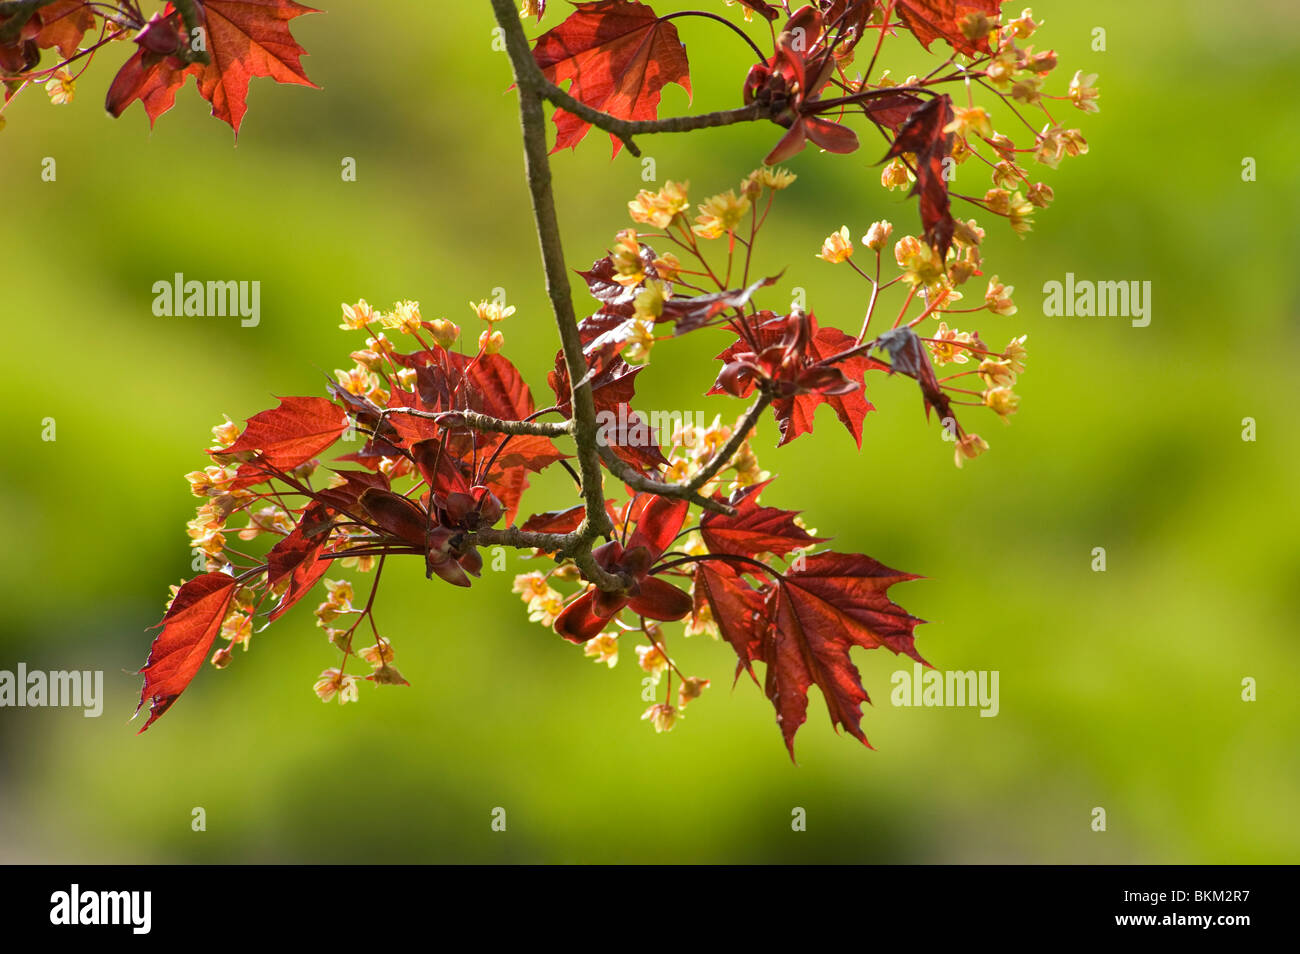 New leaves and flowers of a red leaf maple, Acer platanoides Crimson King Stock Photo